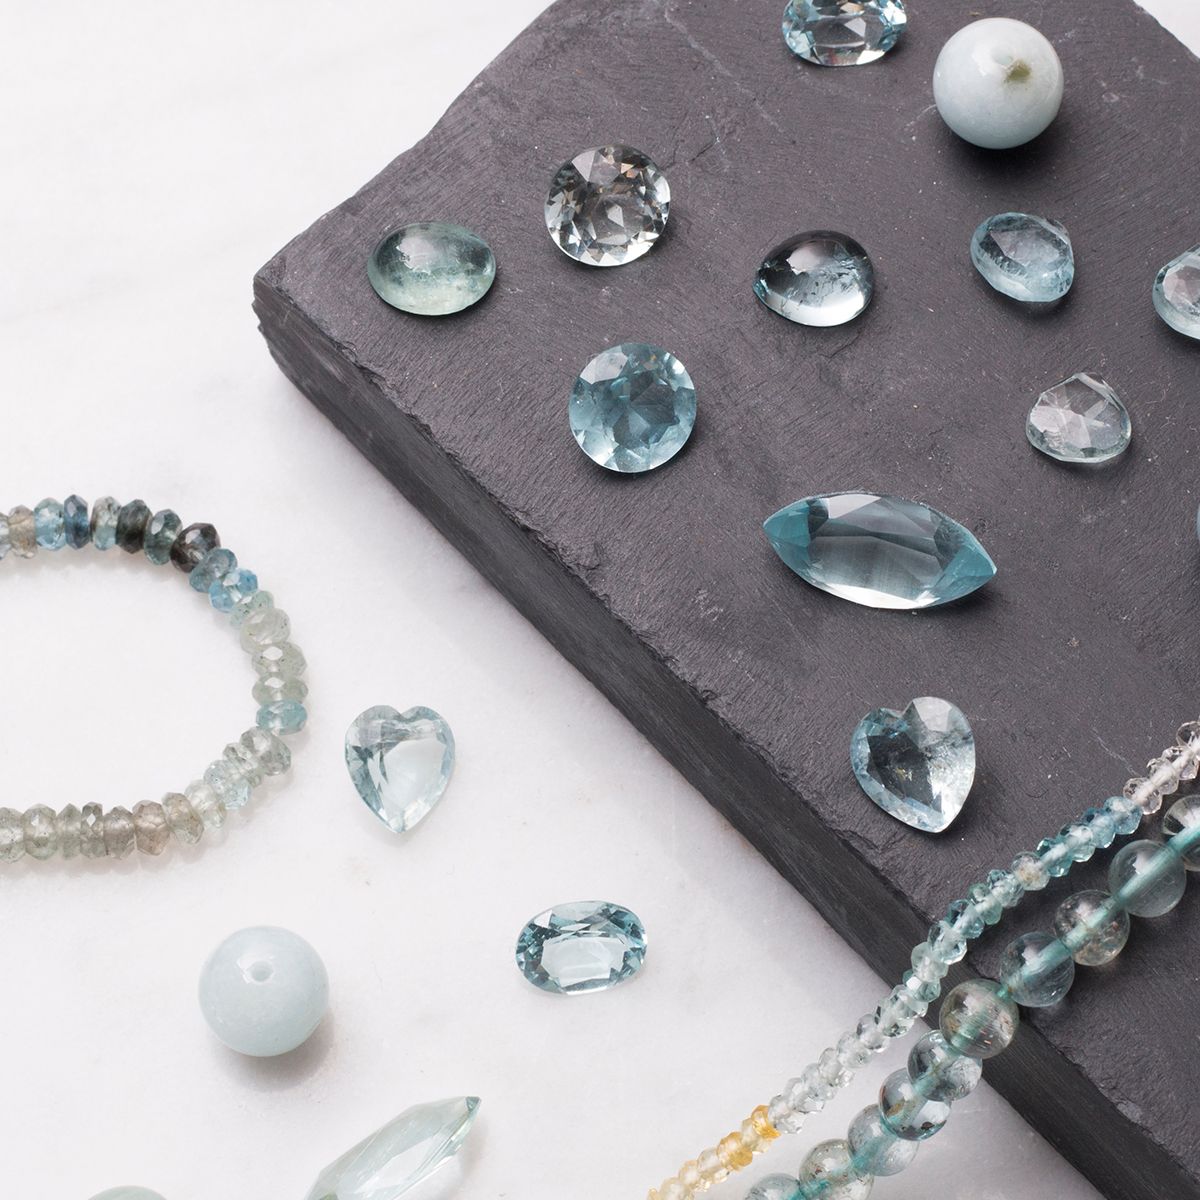 Top 10 Affordable Gemstones For Jewellery Making